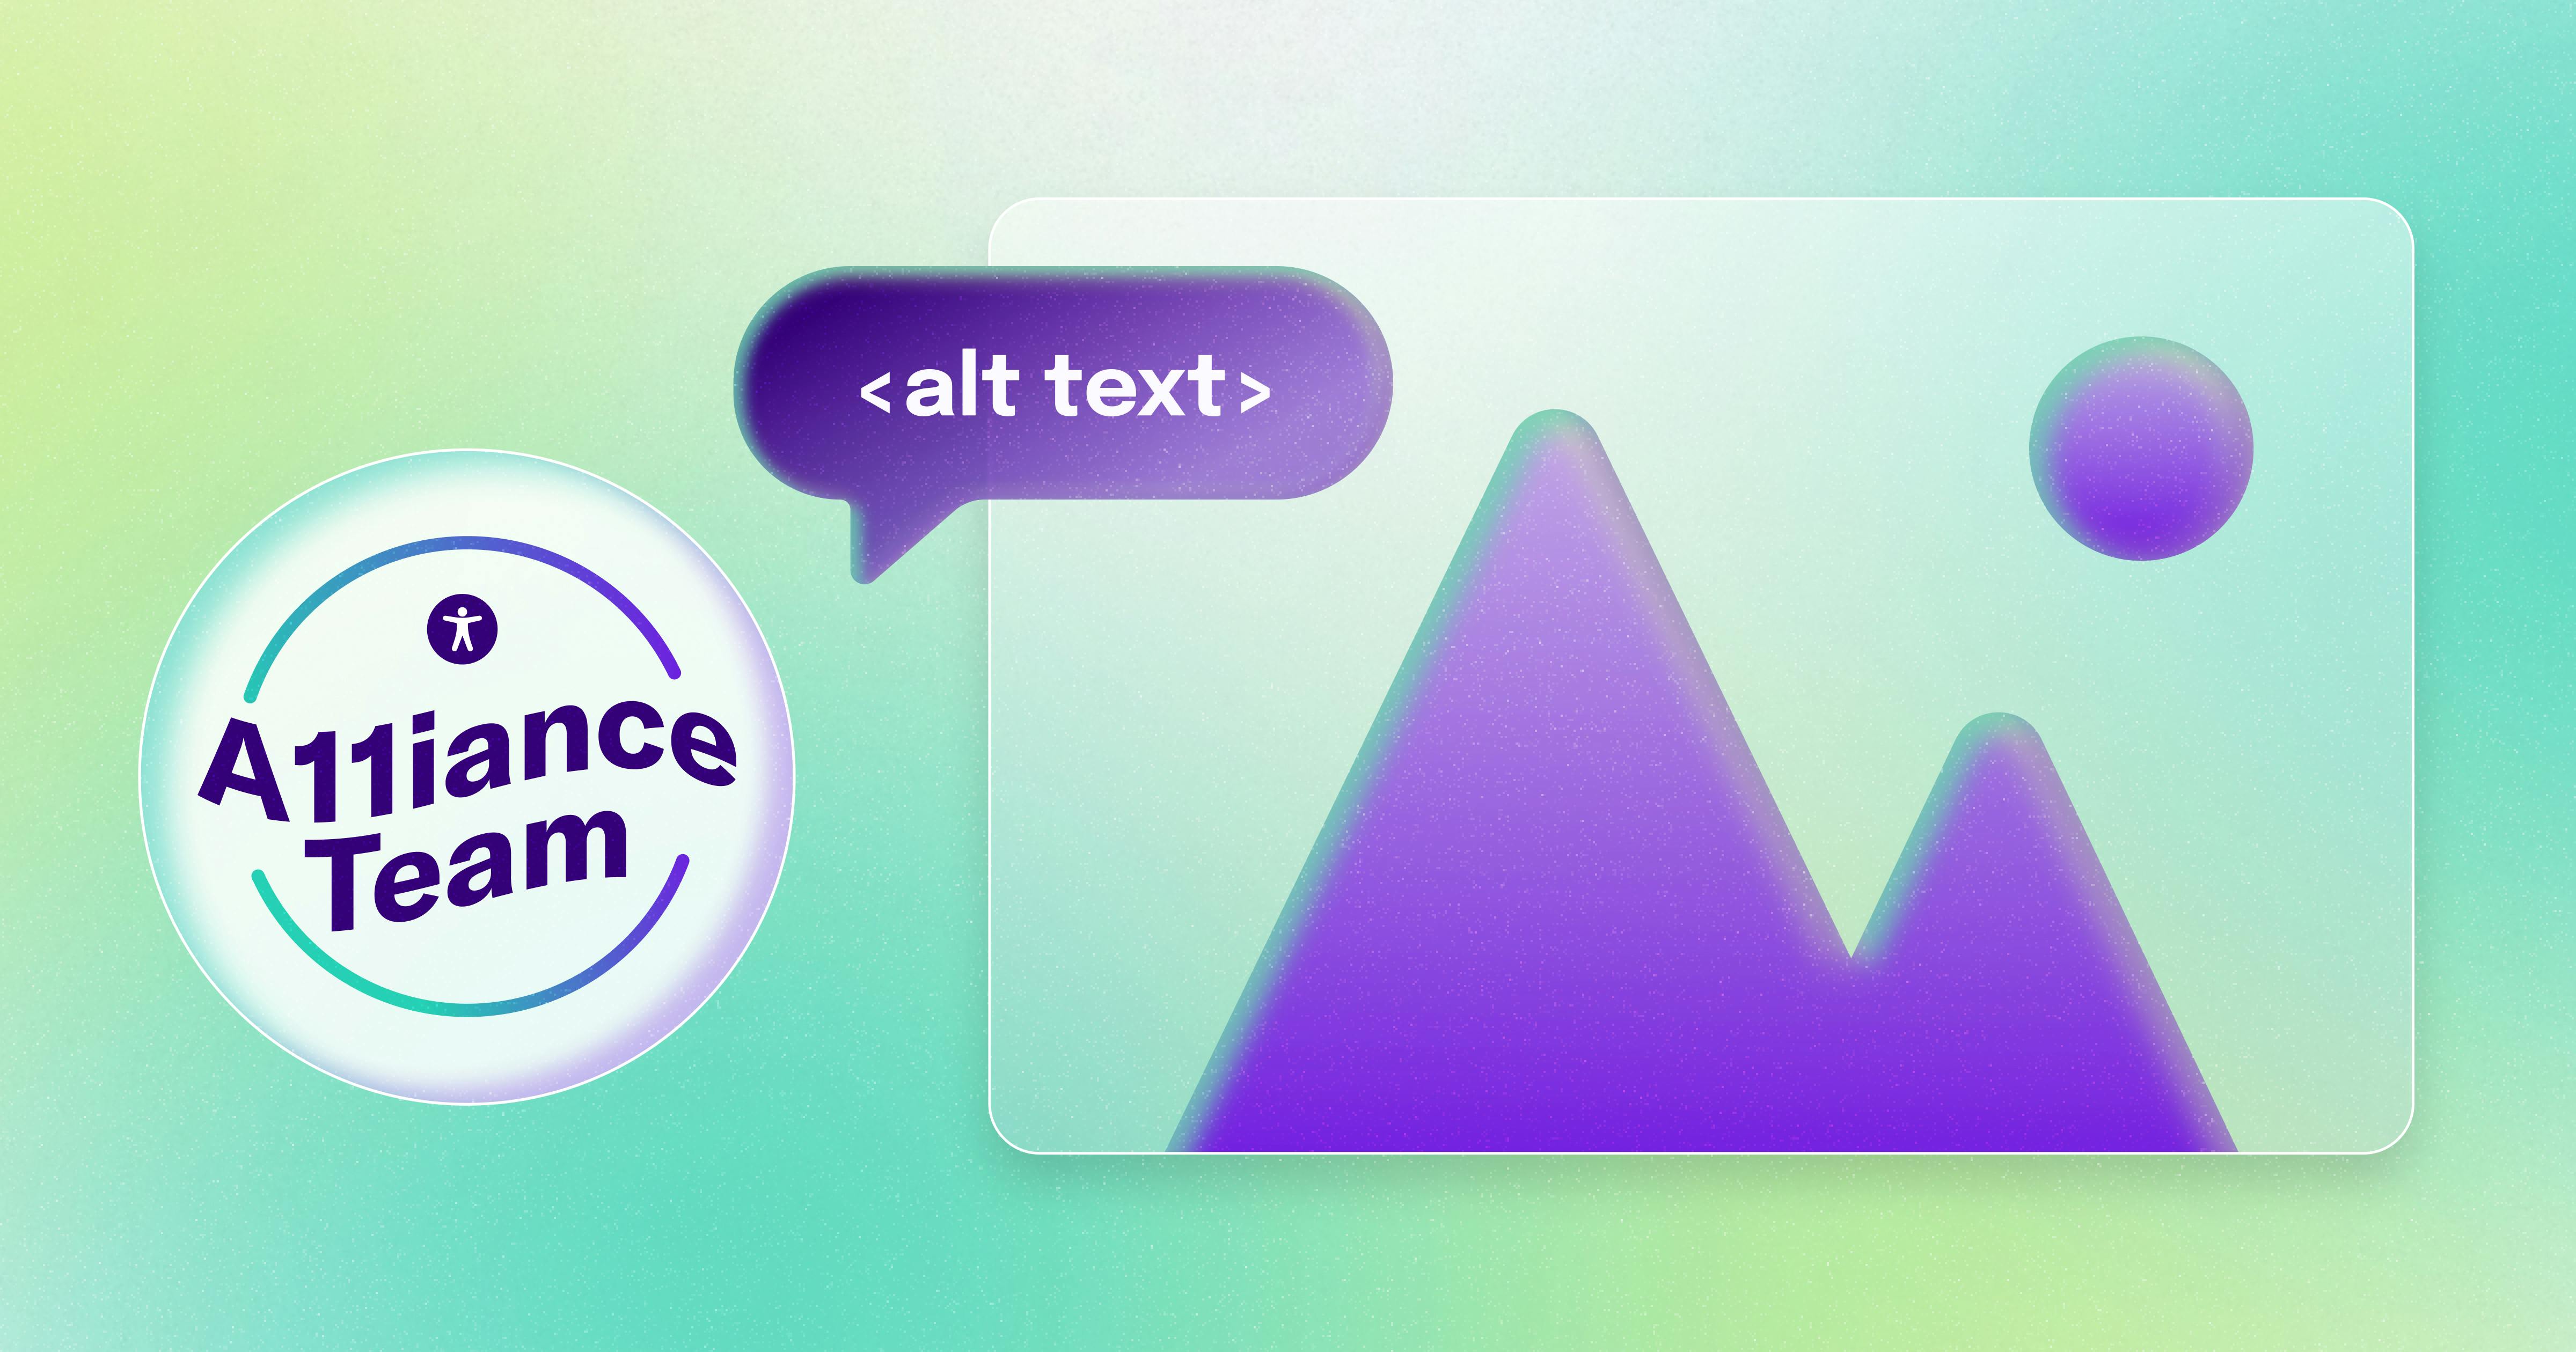 A badge that reads "A11iance Team" next to a stylized image of a mountain and a quotation bubble that reads <alt text>.